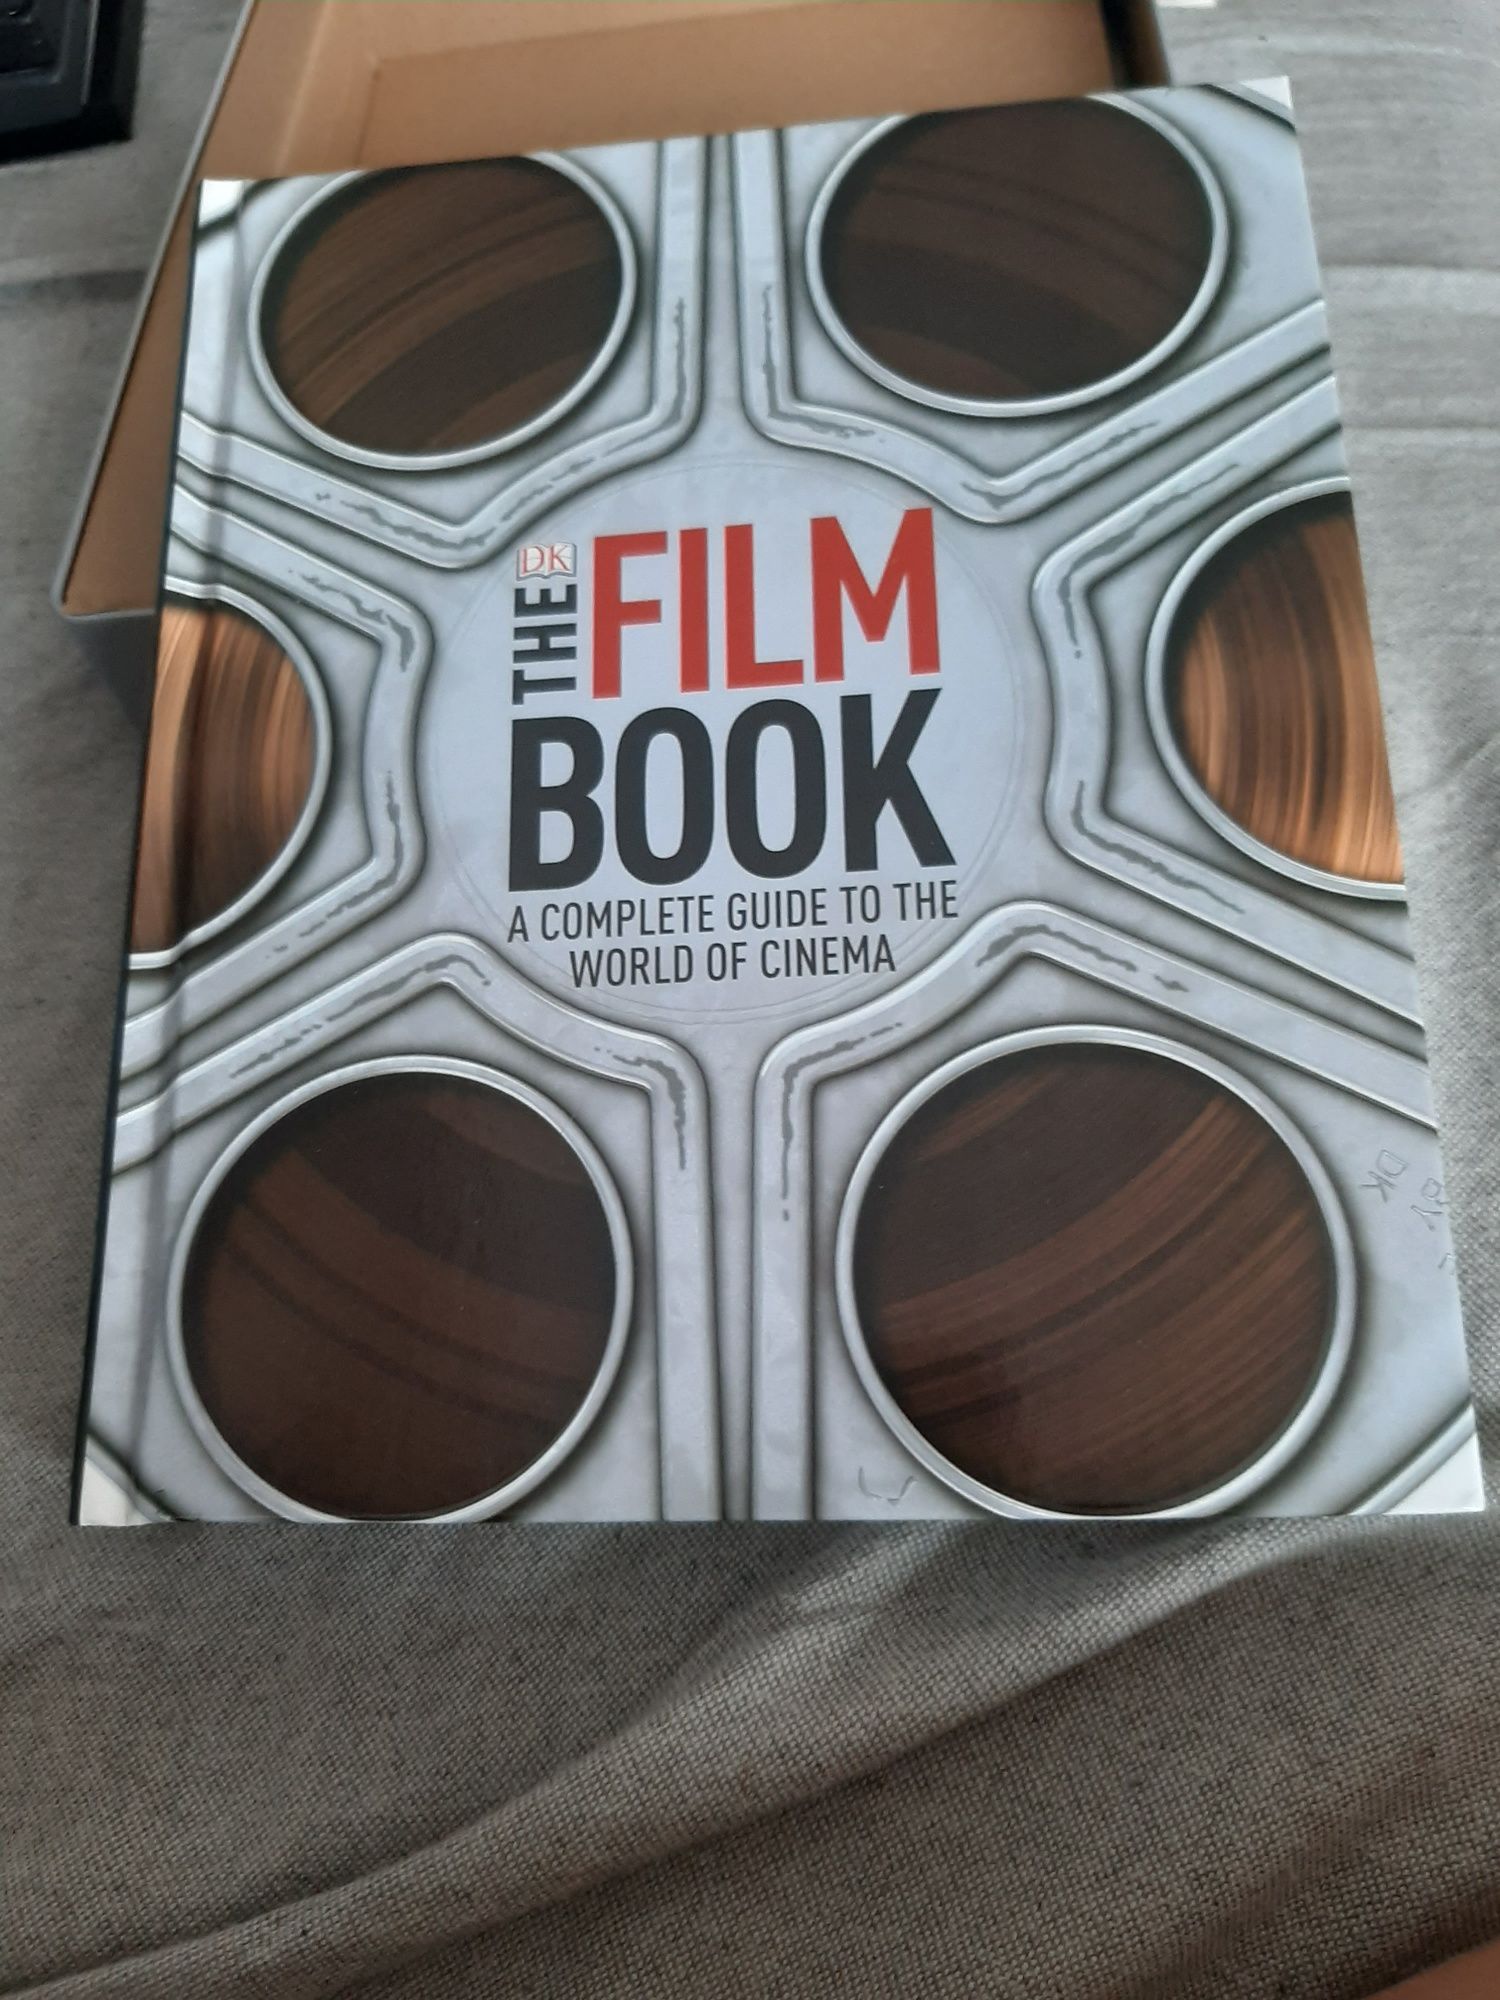 The film book - a complete guide to the world of cinema